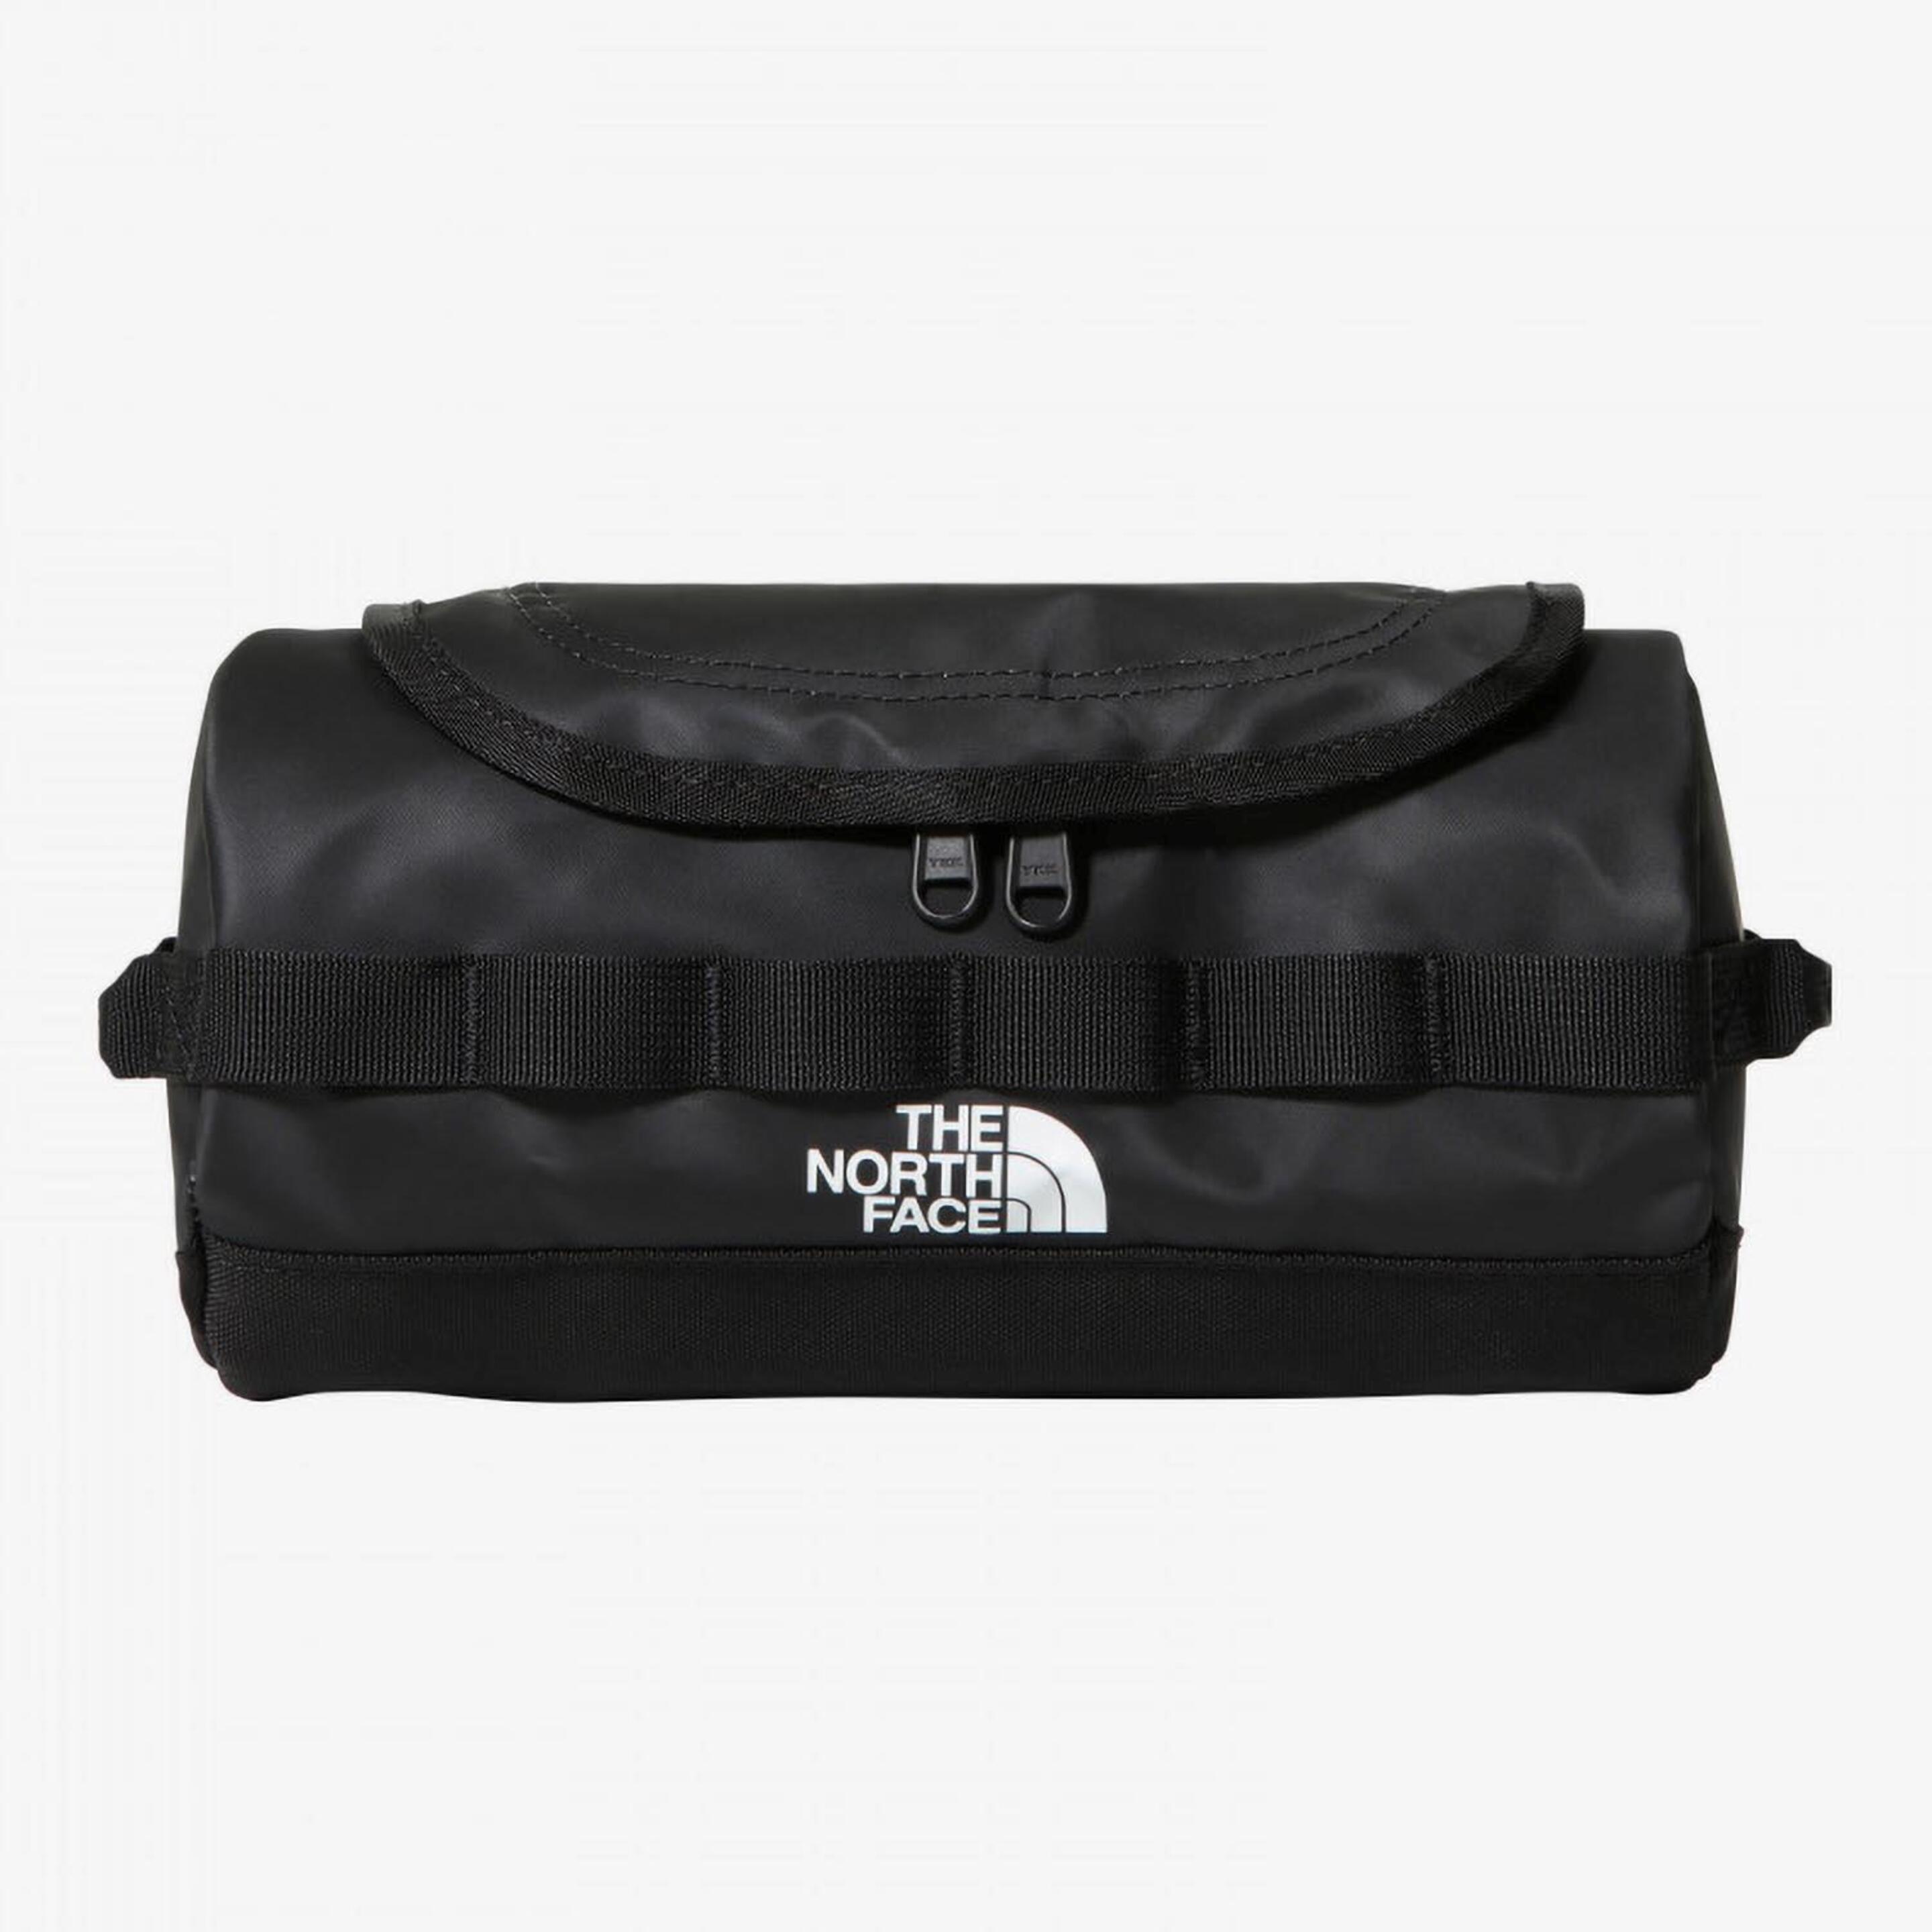 The North Face Canister - negro - Neceser Viaje